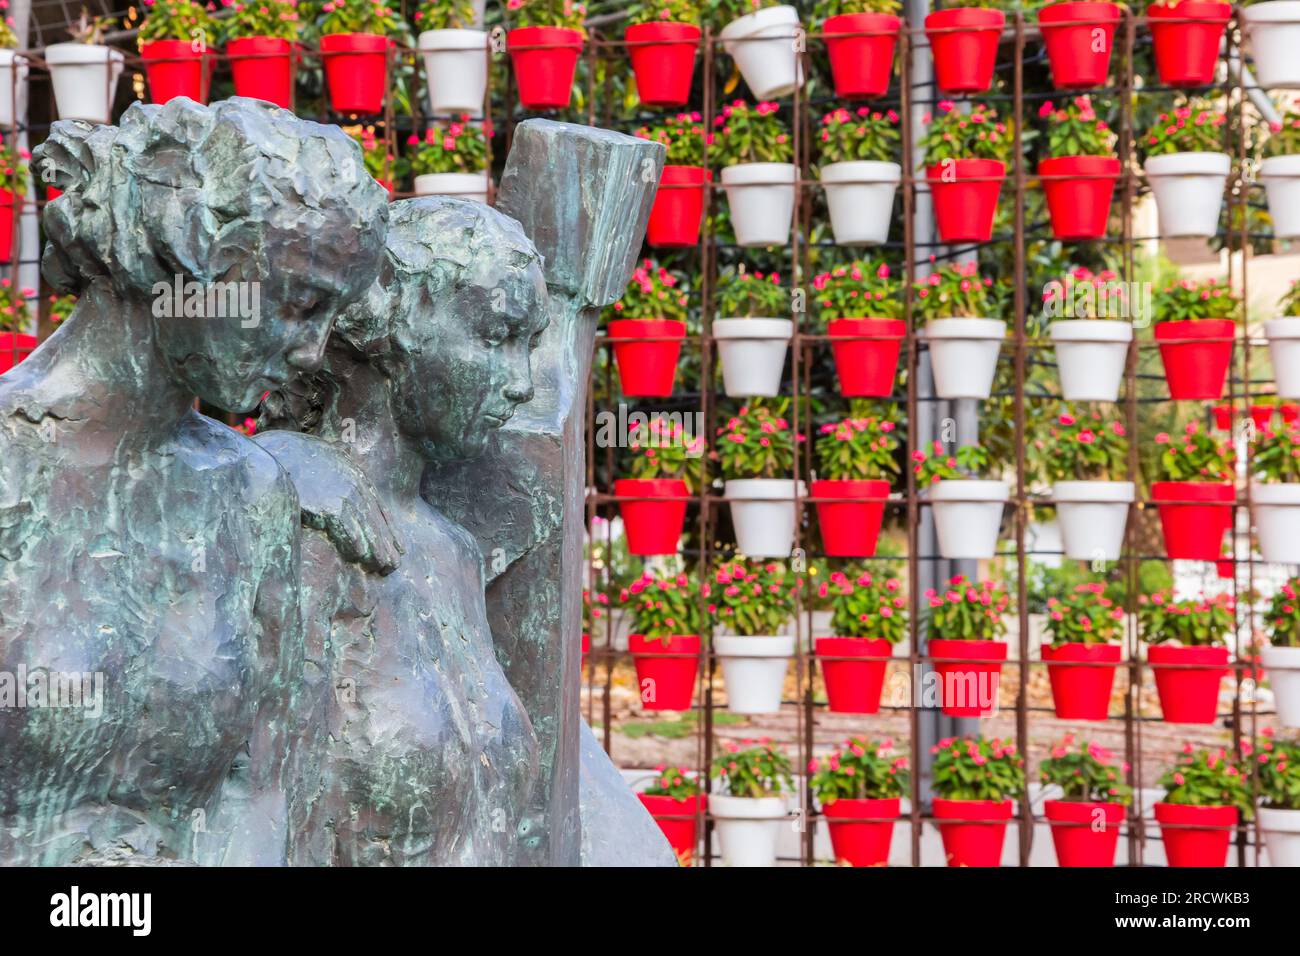 Sculpture in front of red flower pots in Murcia, Spain Stock Photo